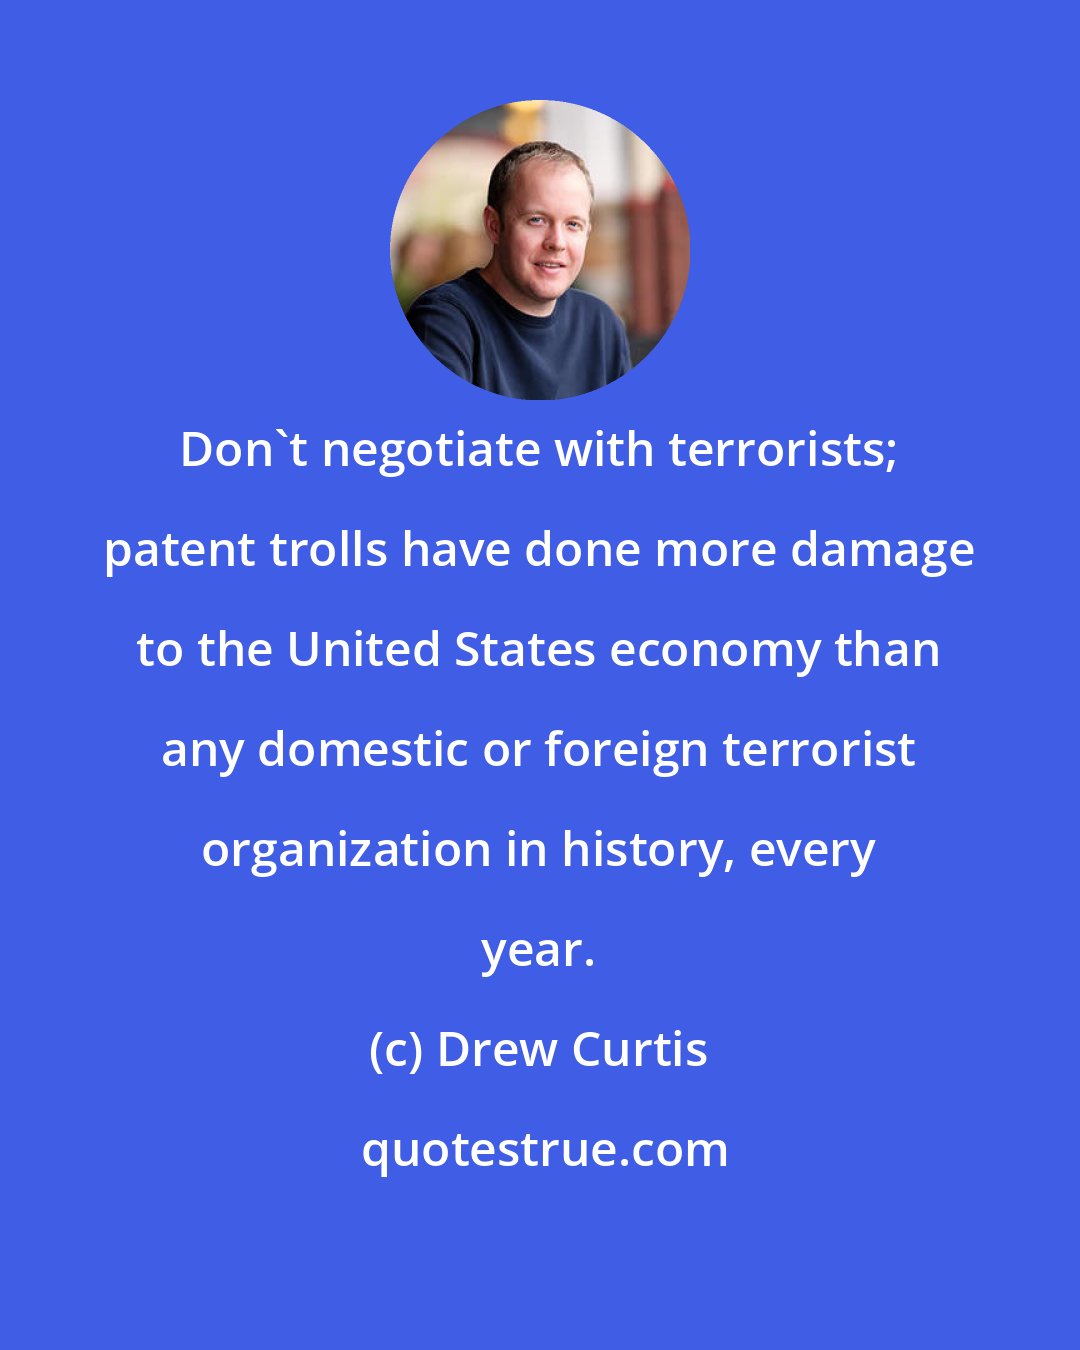 Drew Curtis: Don't negotiate with terrorists; patent trolls have done more damage to the United States economy than any domestic or foreign terrorist organization in history, every year.